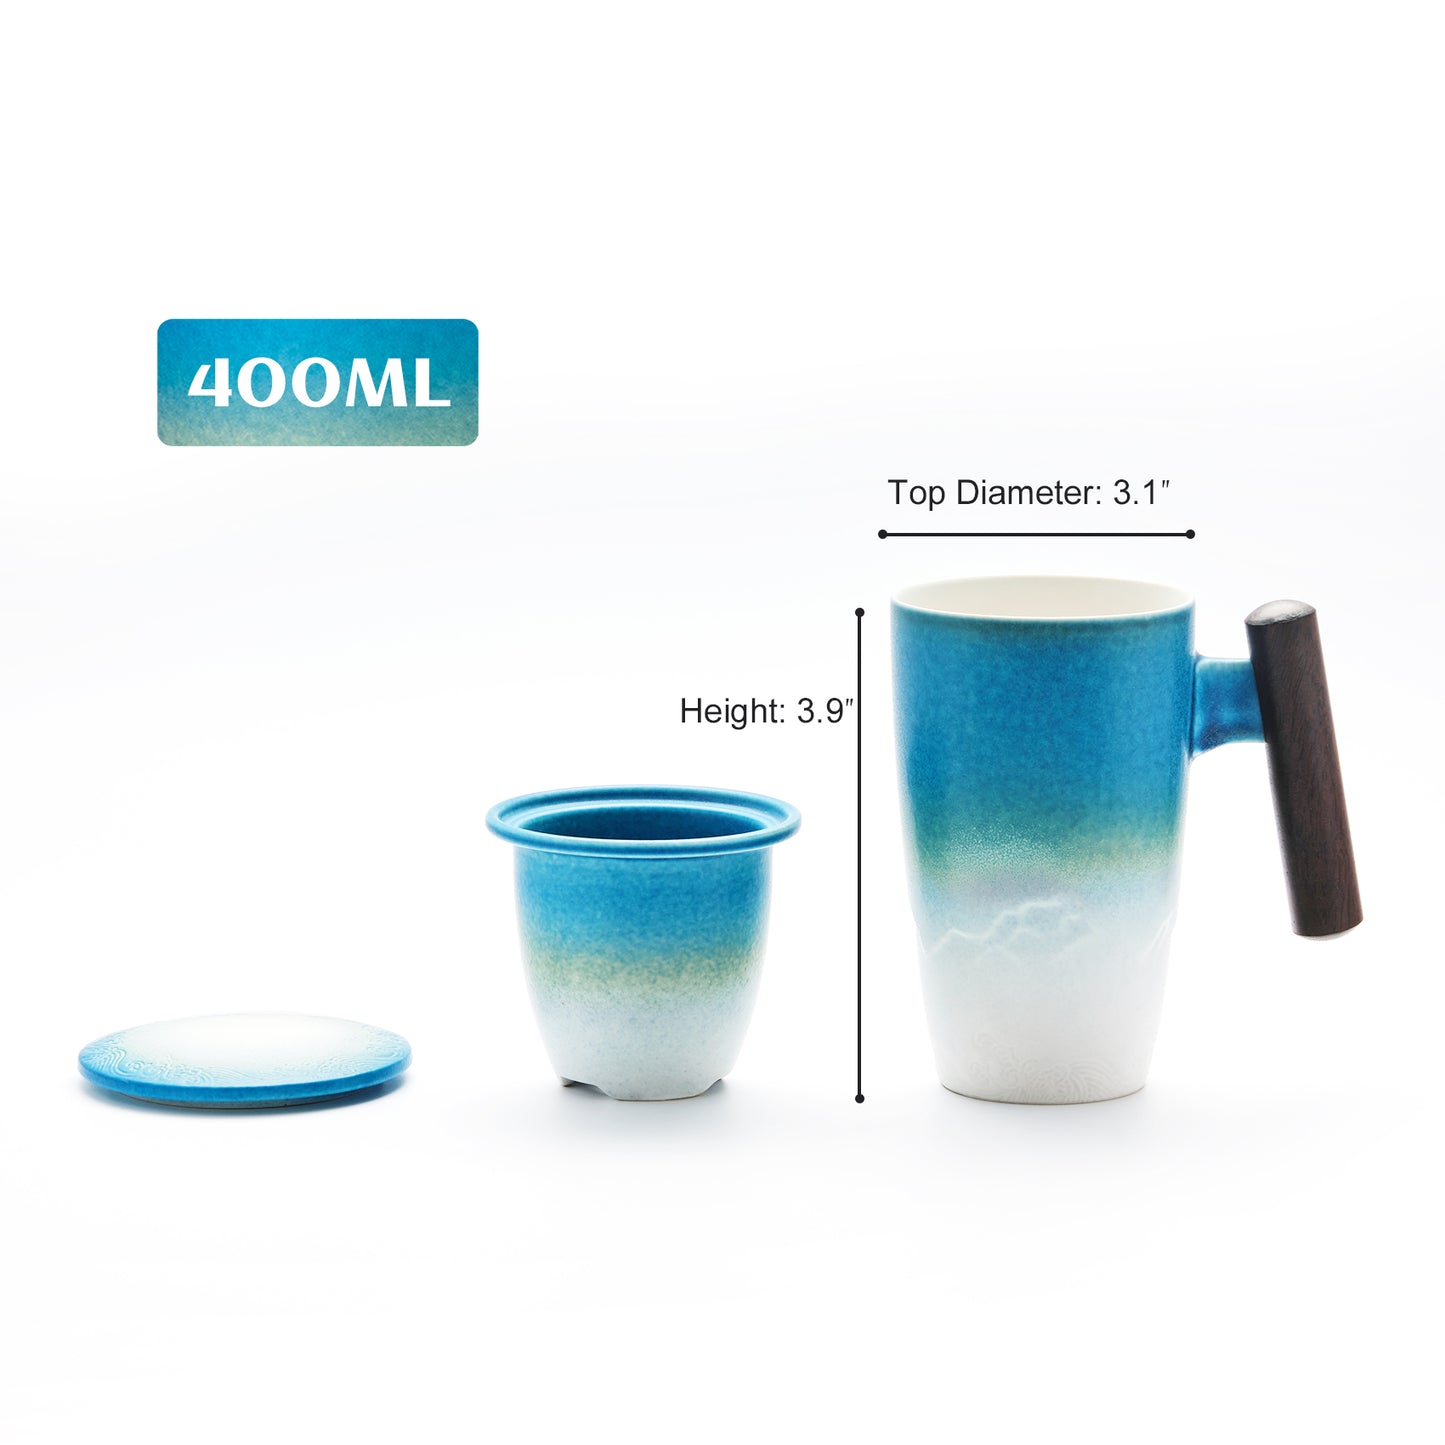 Tomotime Ceramic Tea Cup with Infuser and Lid Tea Mugs Wooden Handle 400ml/13.5oz (Cyan Blue)